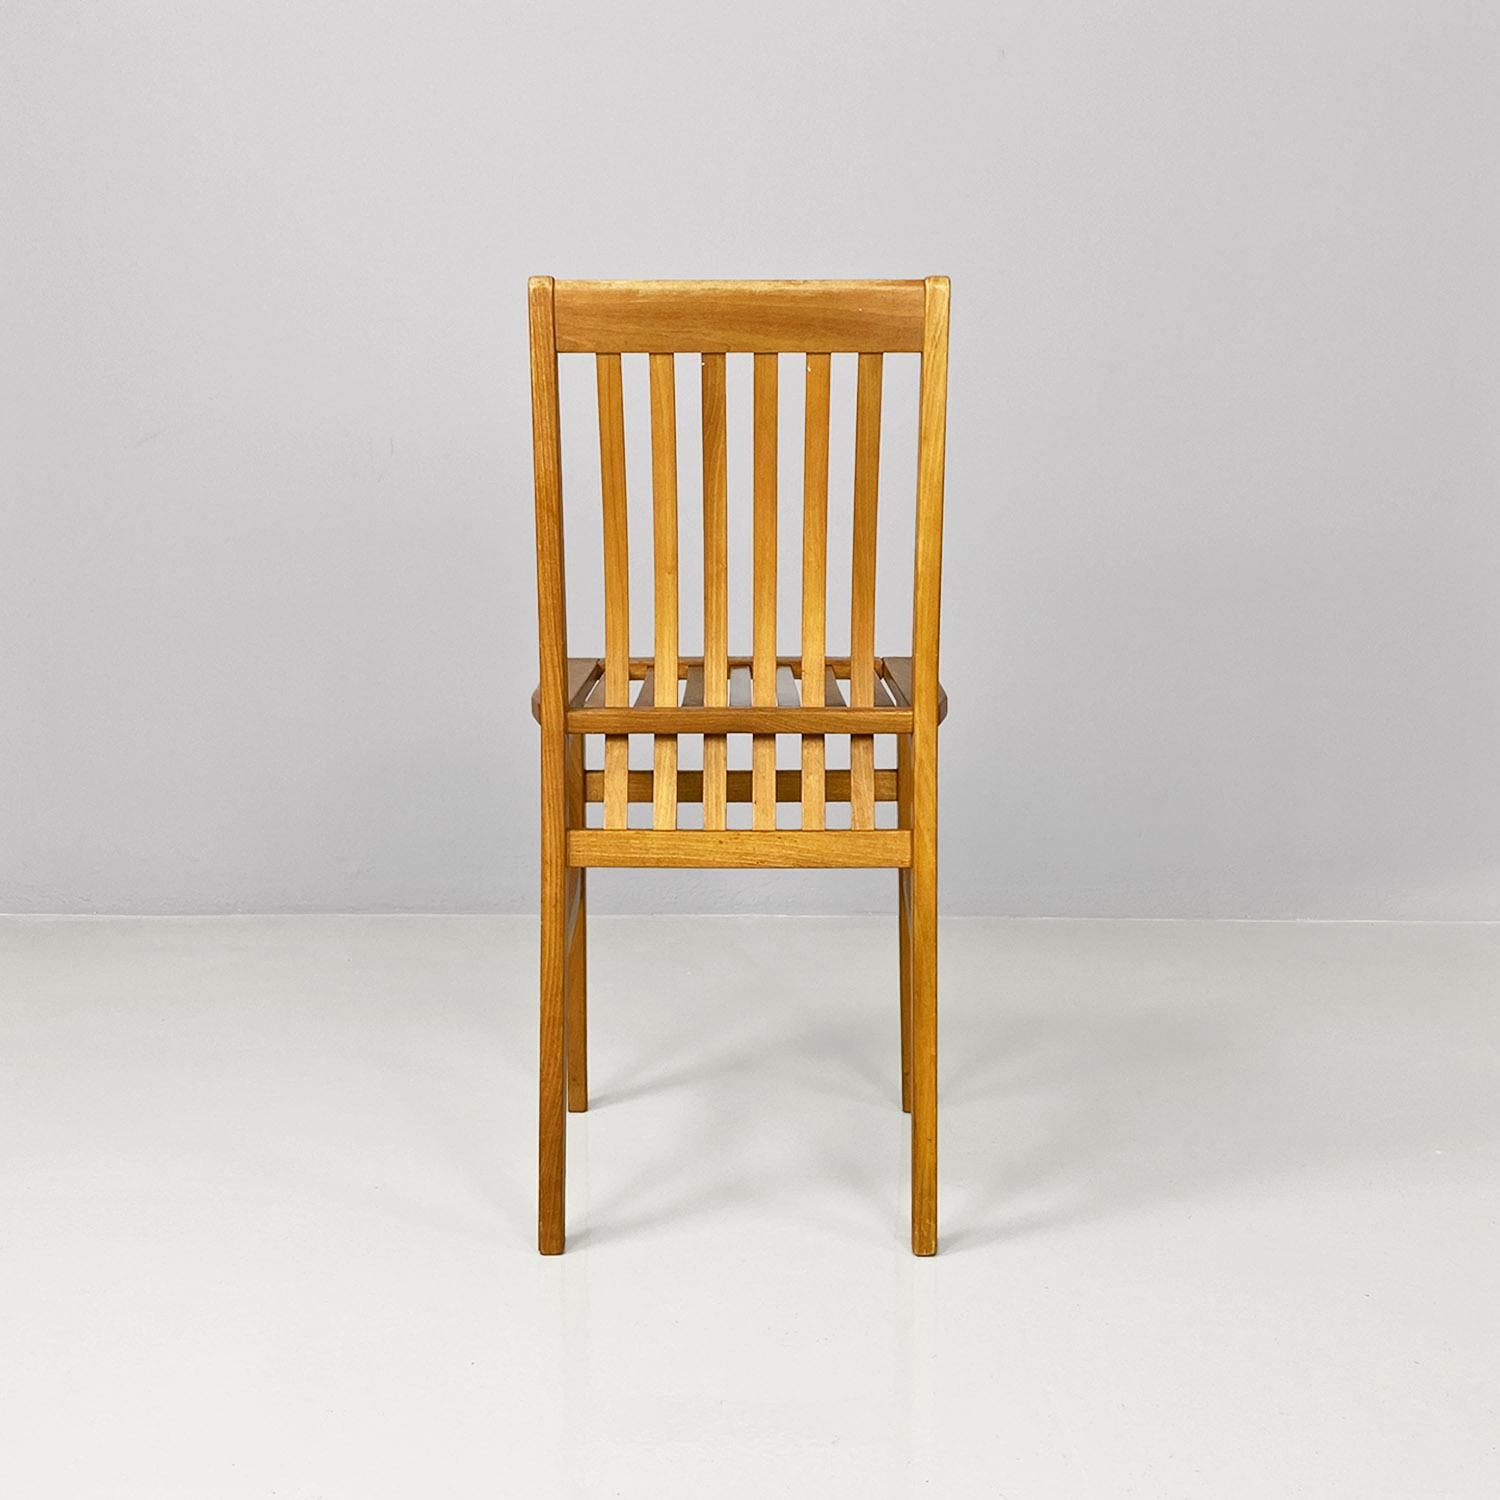 Italian modern set of four wooden Milano chairs by Aldo Rossi for Molteni, 1987 For Sale 2